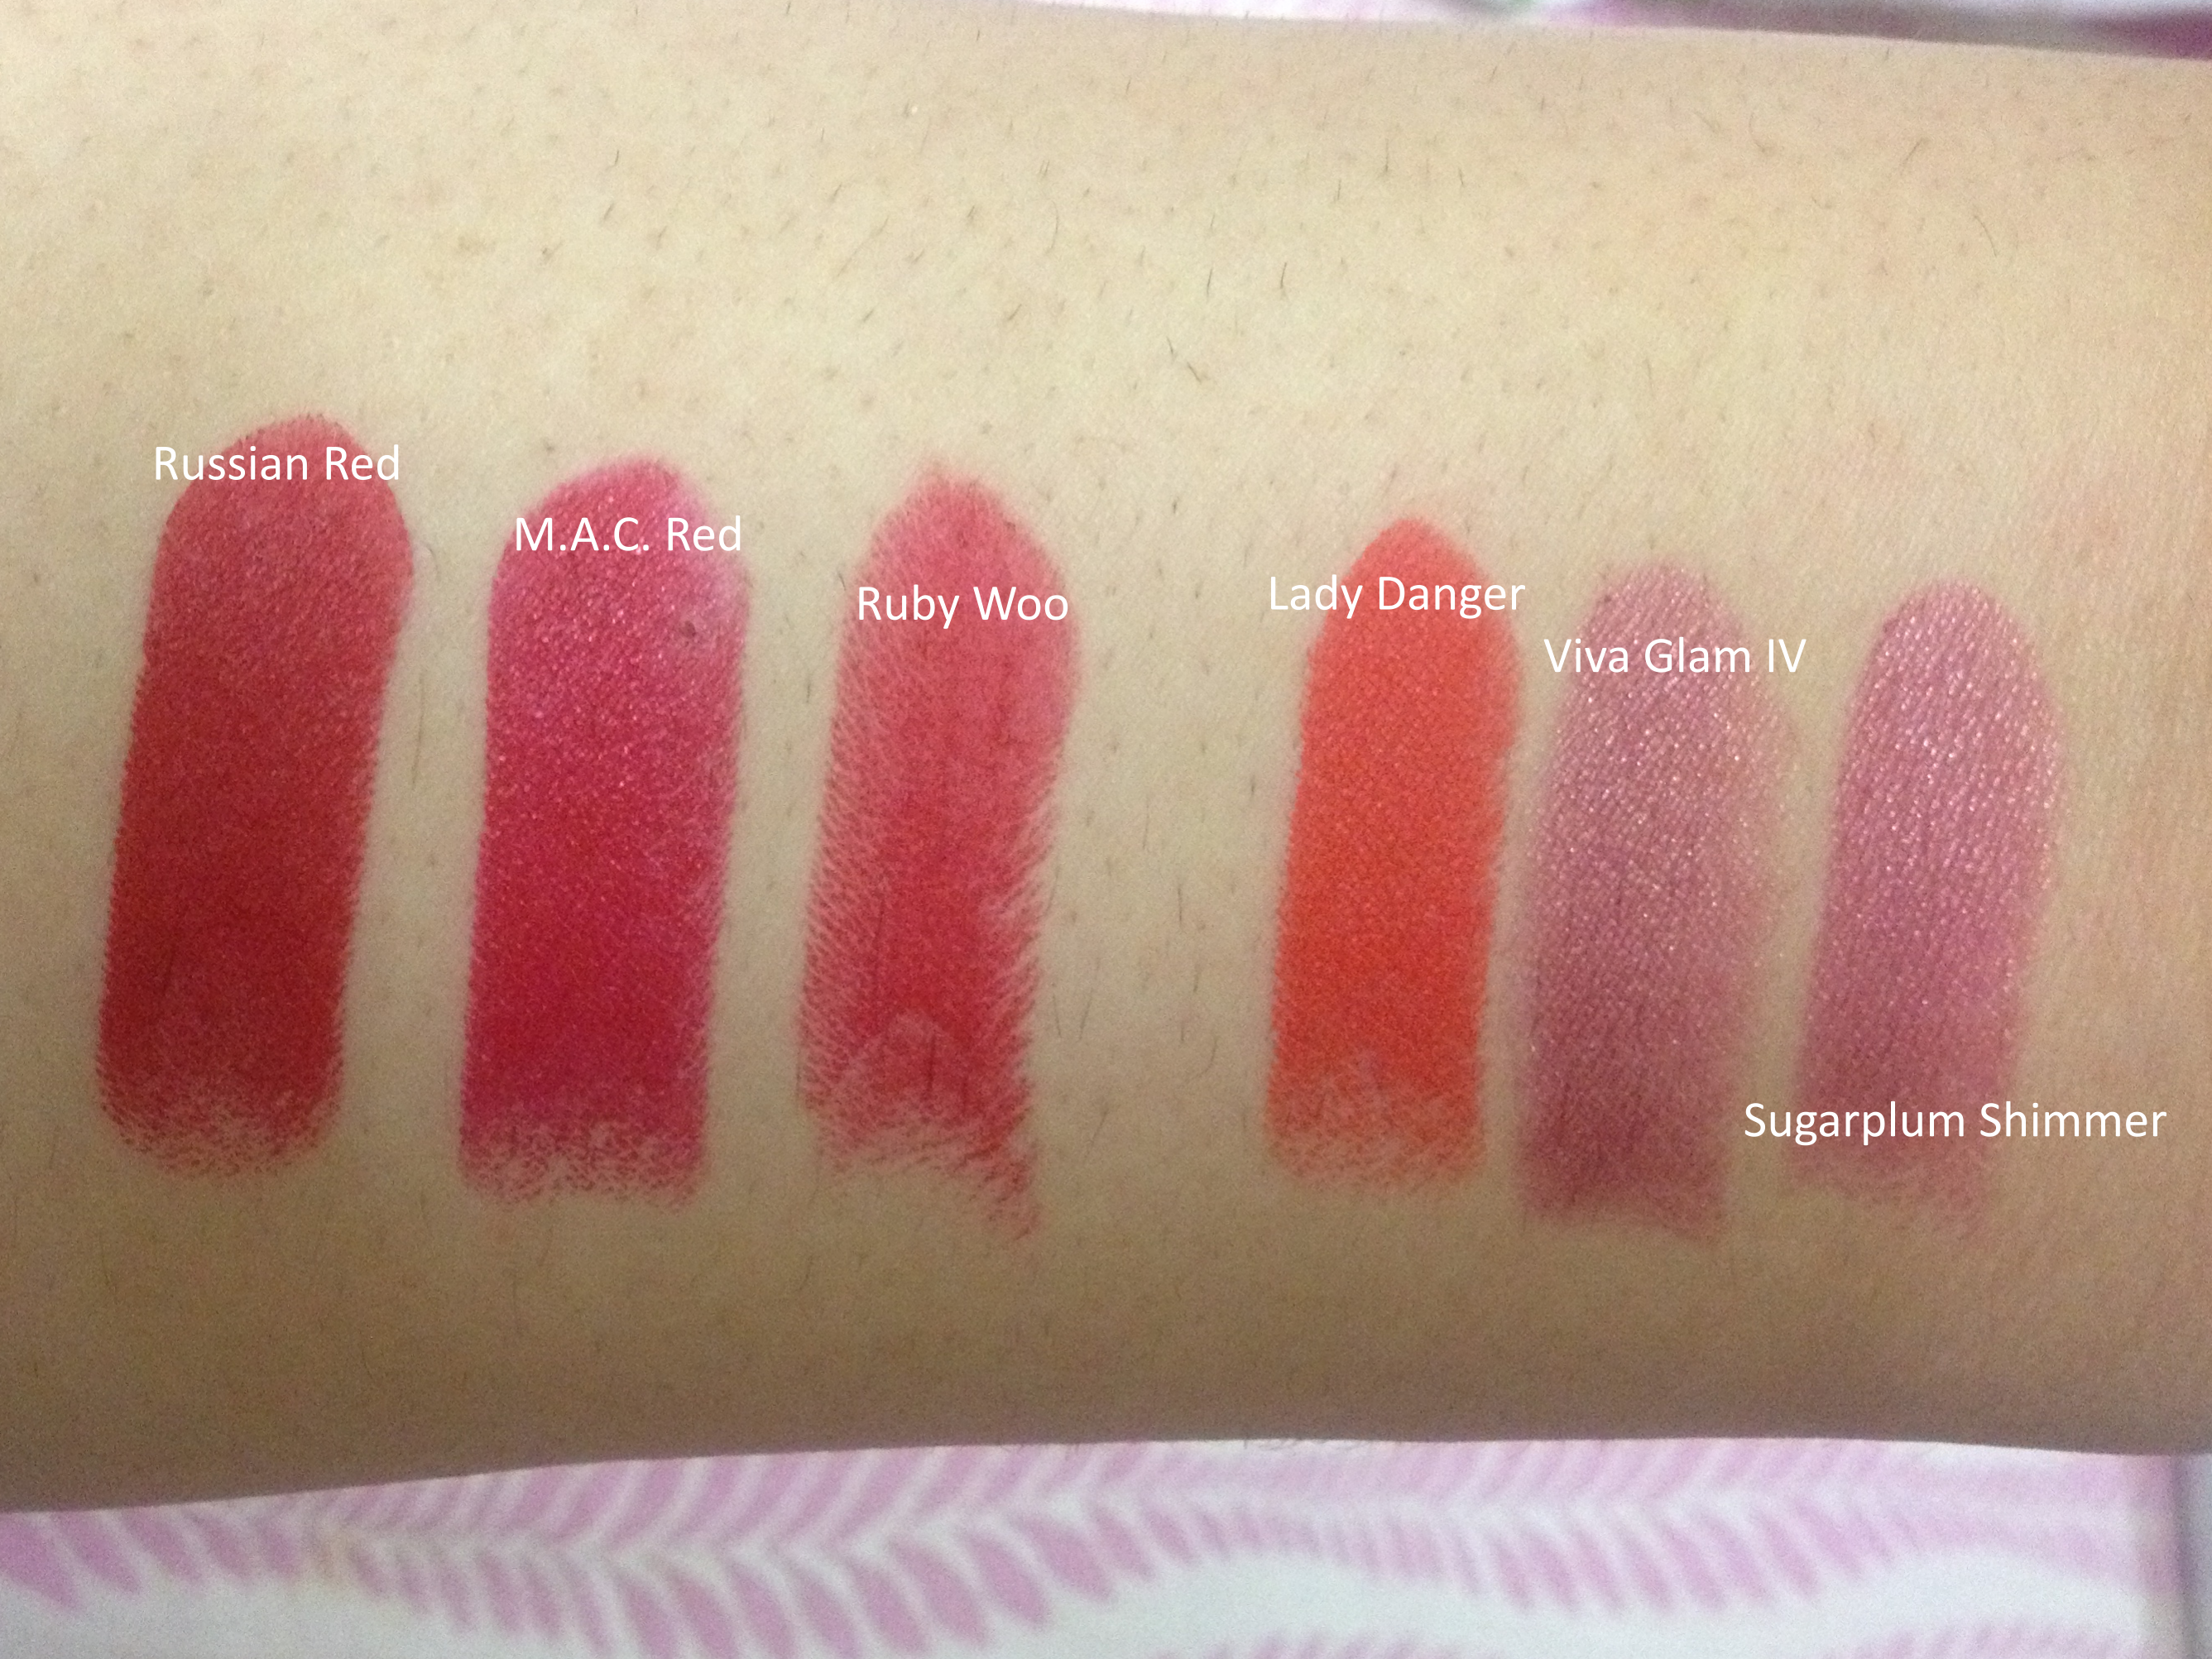 Red Lipstick Swatches.  the feminist you were warned about